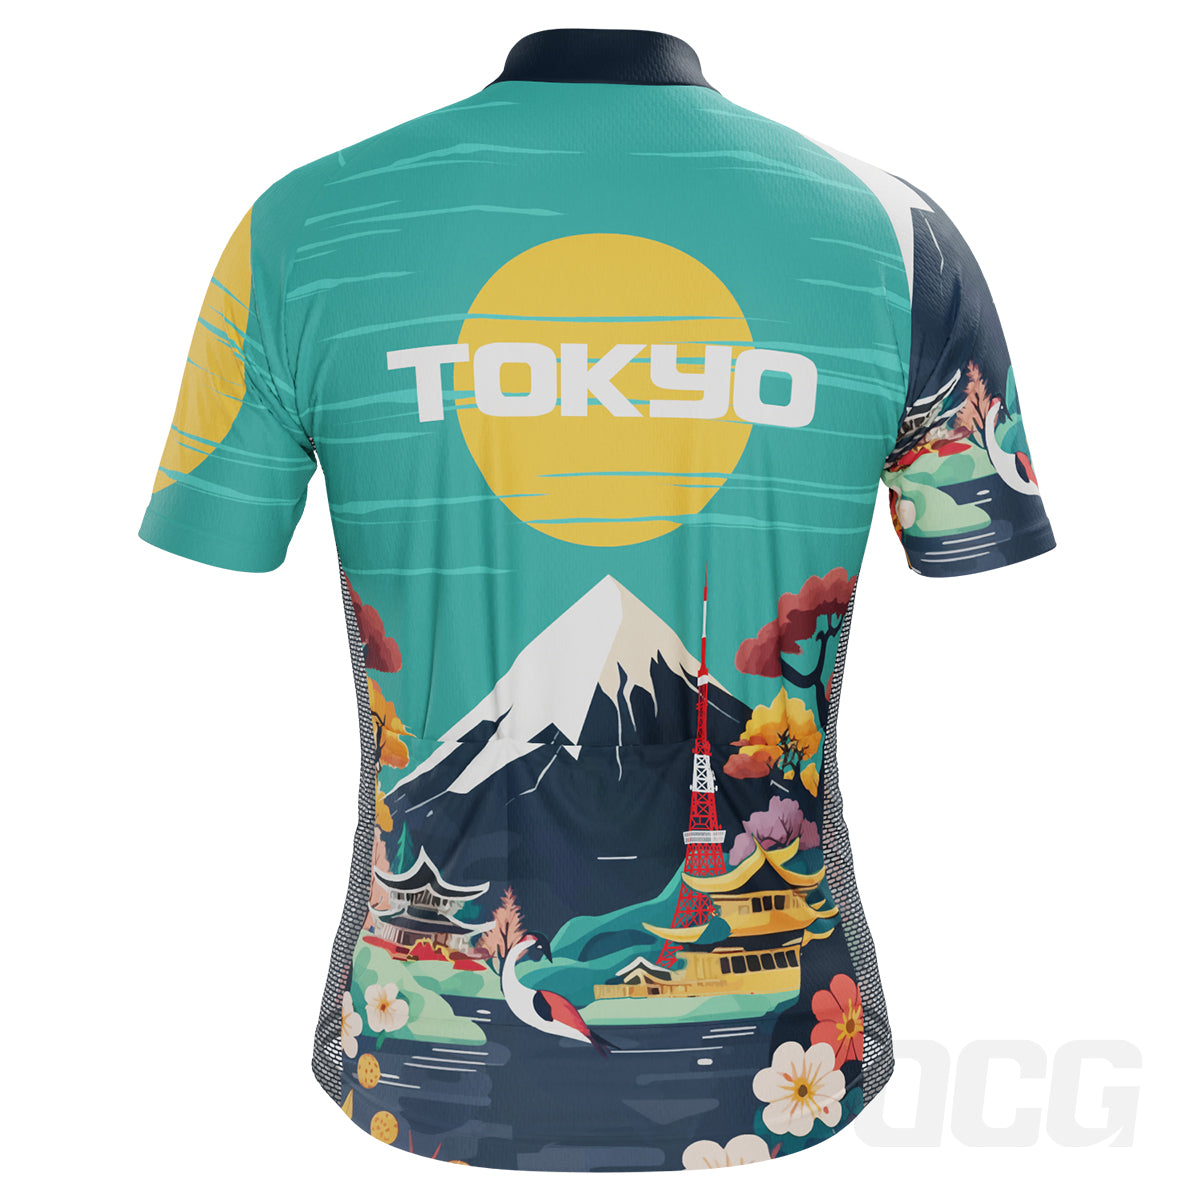 Men's Around The World - Tokyo Short Sleeve Cycling Jersey